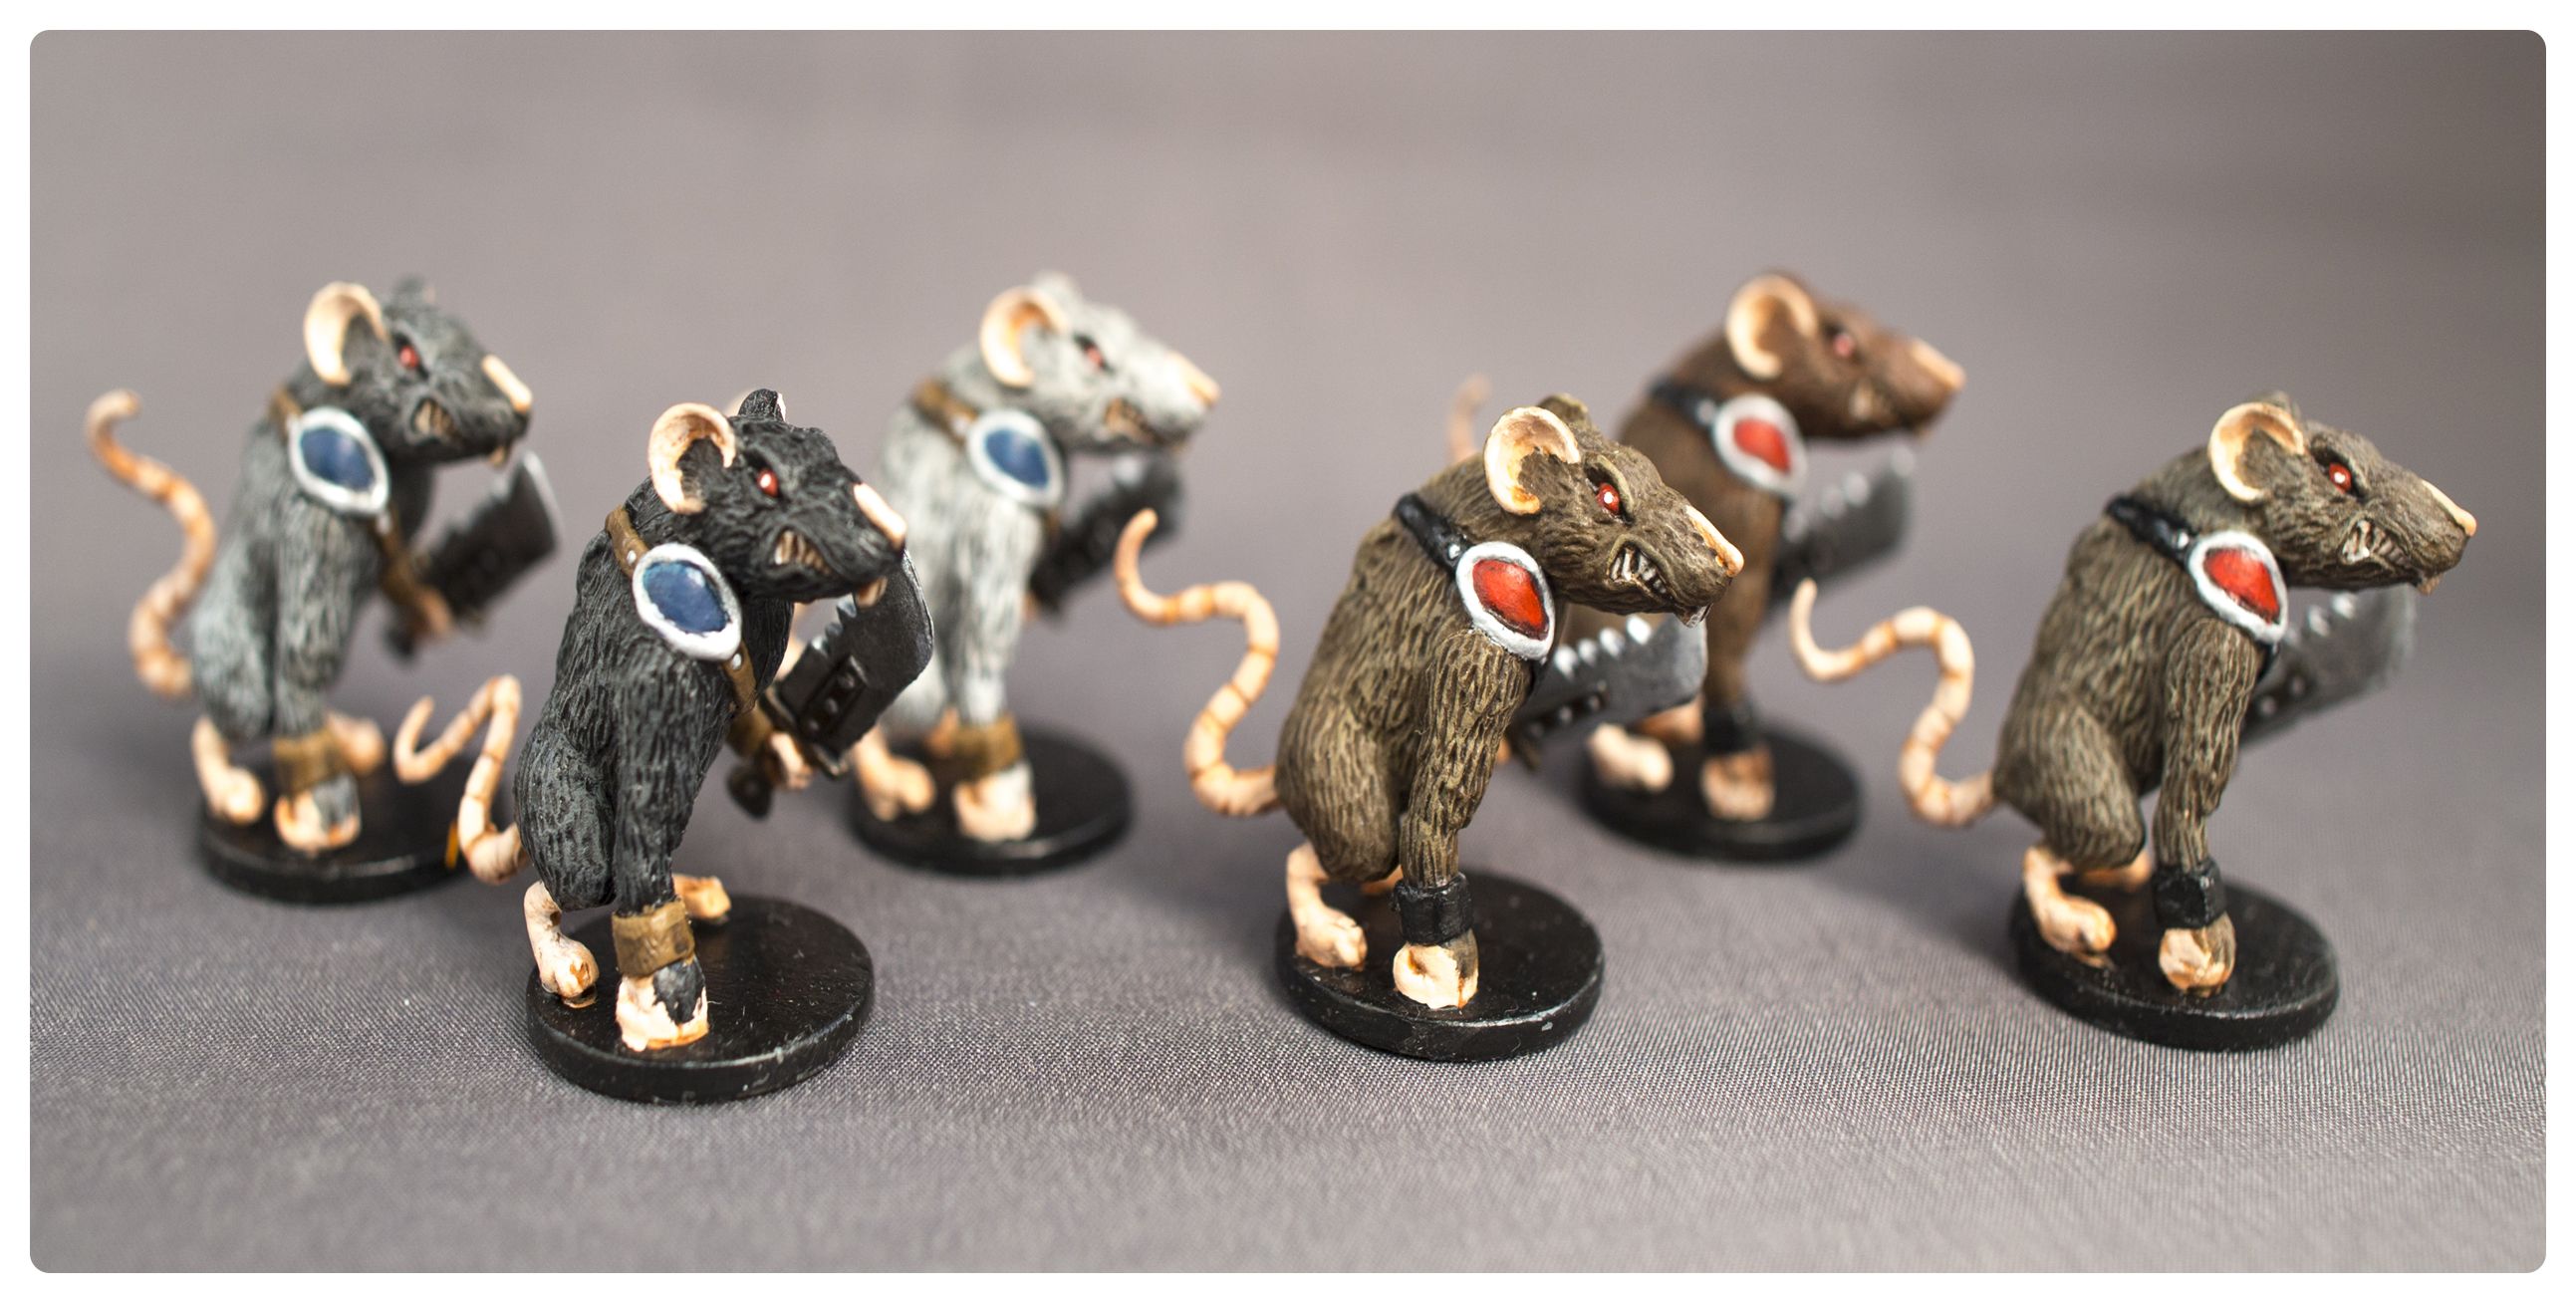 Miniature figures from the Mice and Mystics tabletop board game that ...